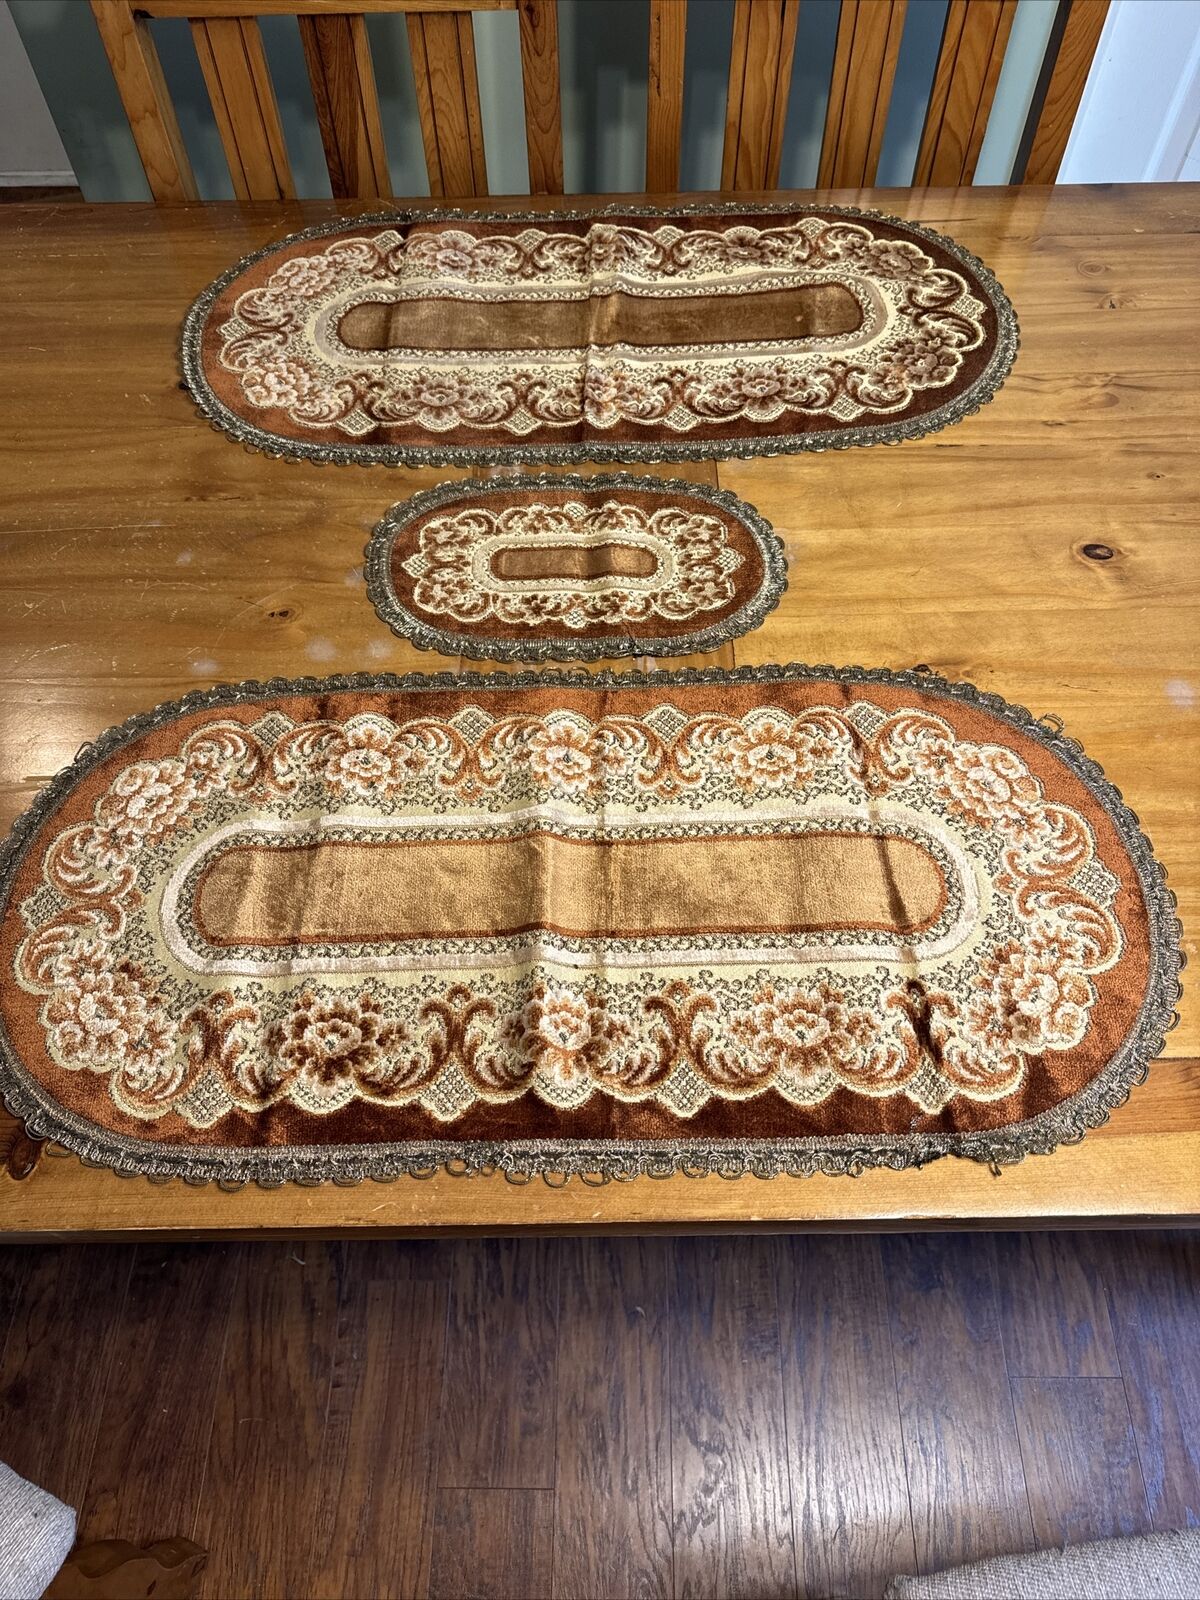 Group Of Three Vintage Wedgwood Oval Shaped Tableware, Rug, Placemat, Doily